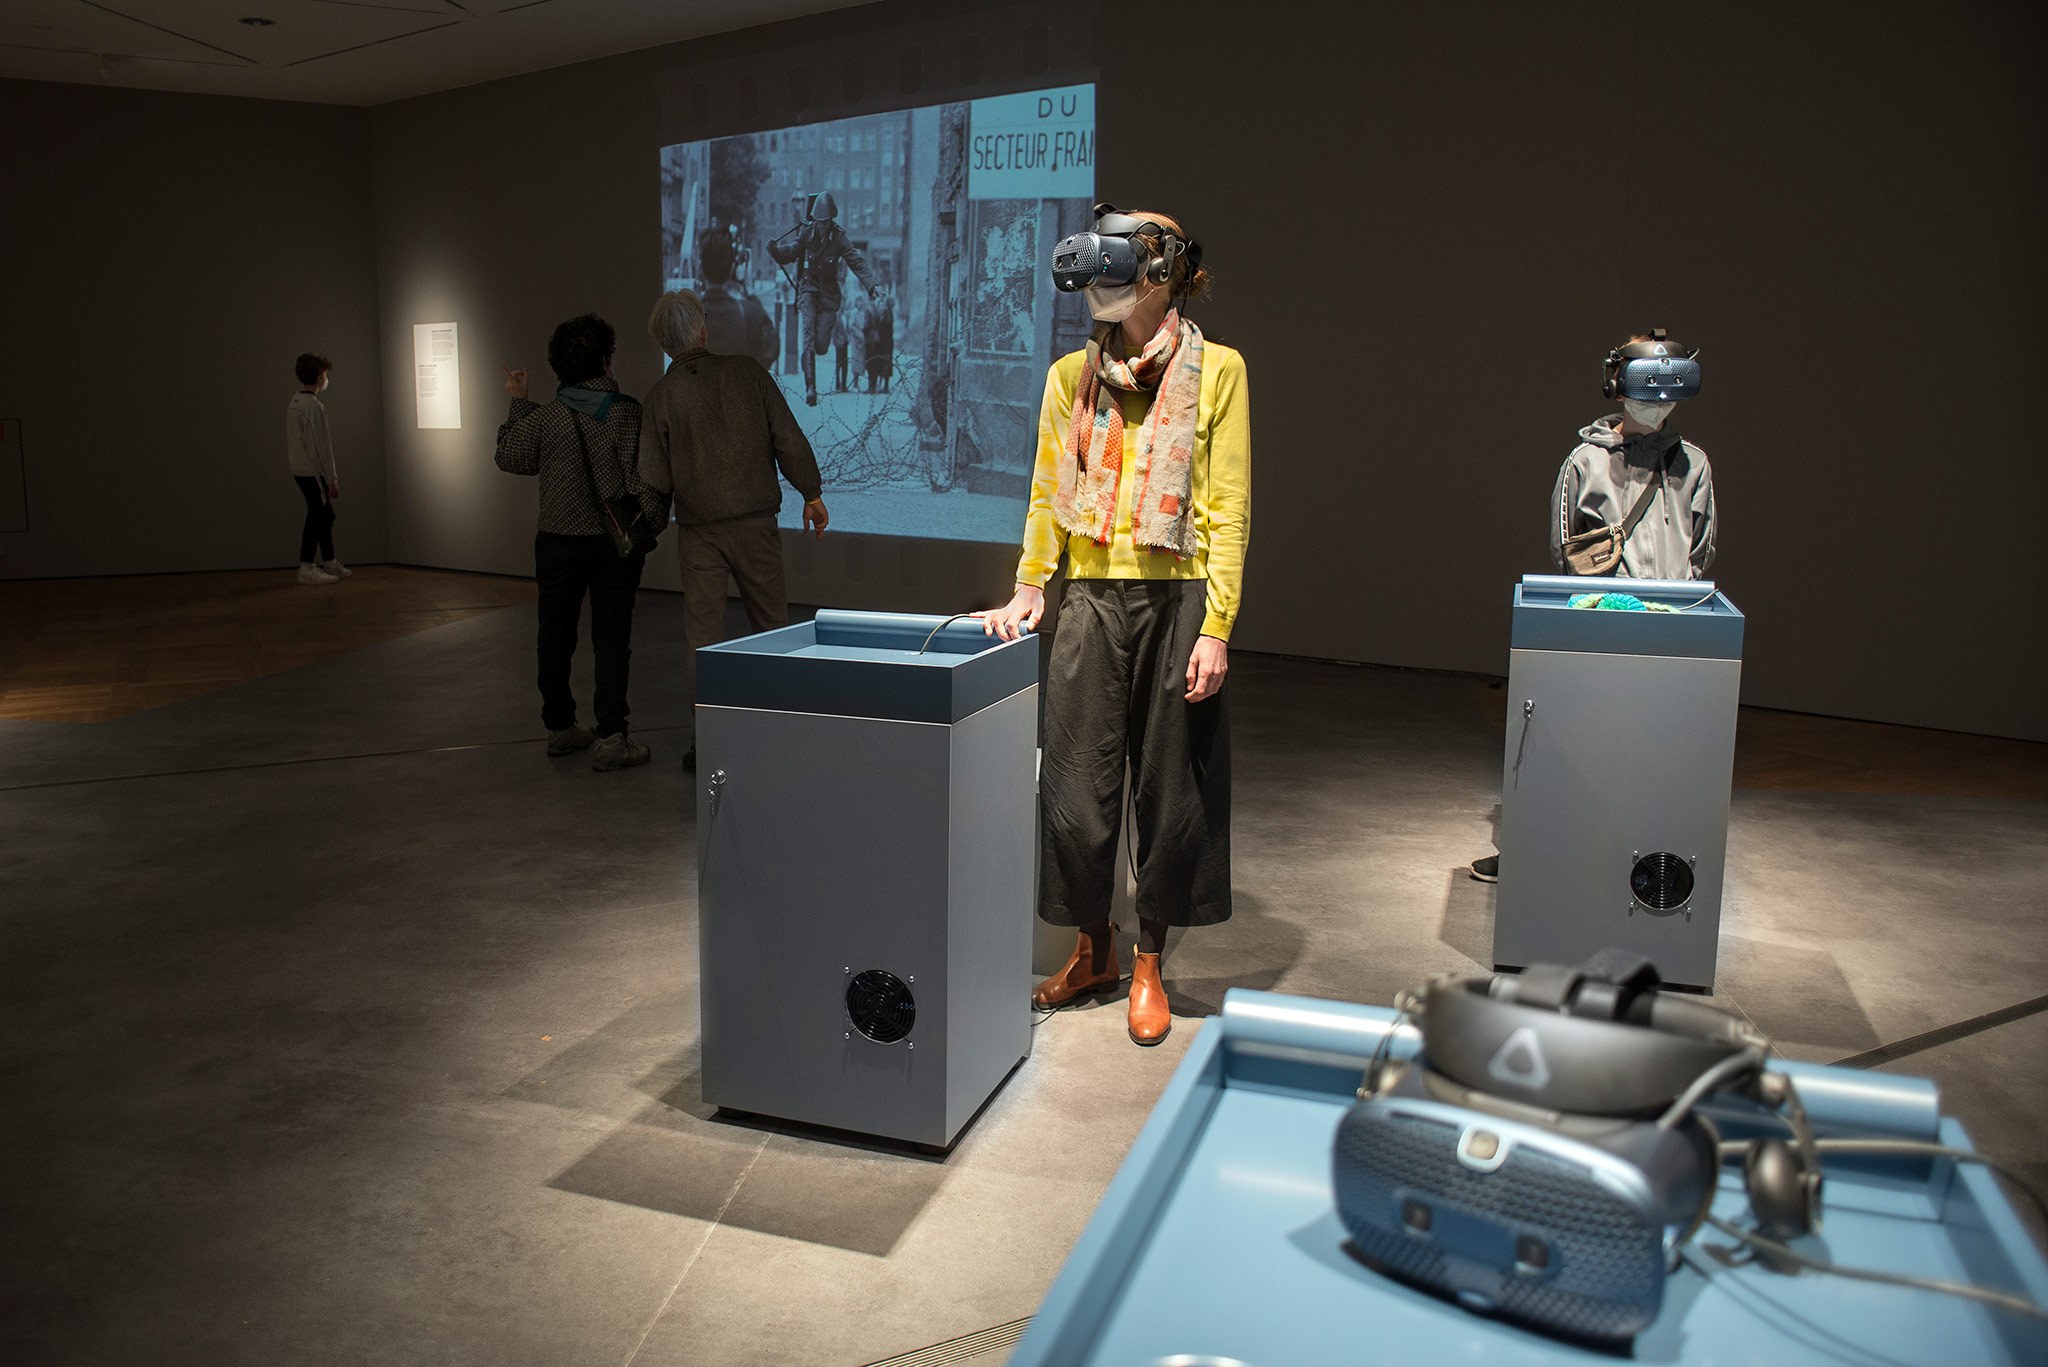 The Leap - Visitors with VR Headset, Projection